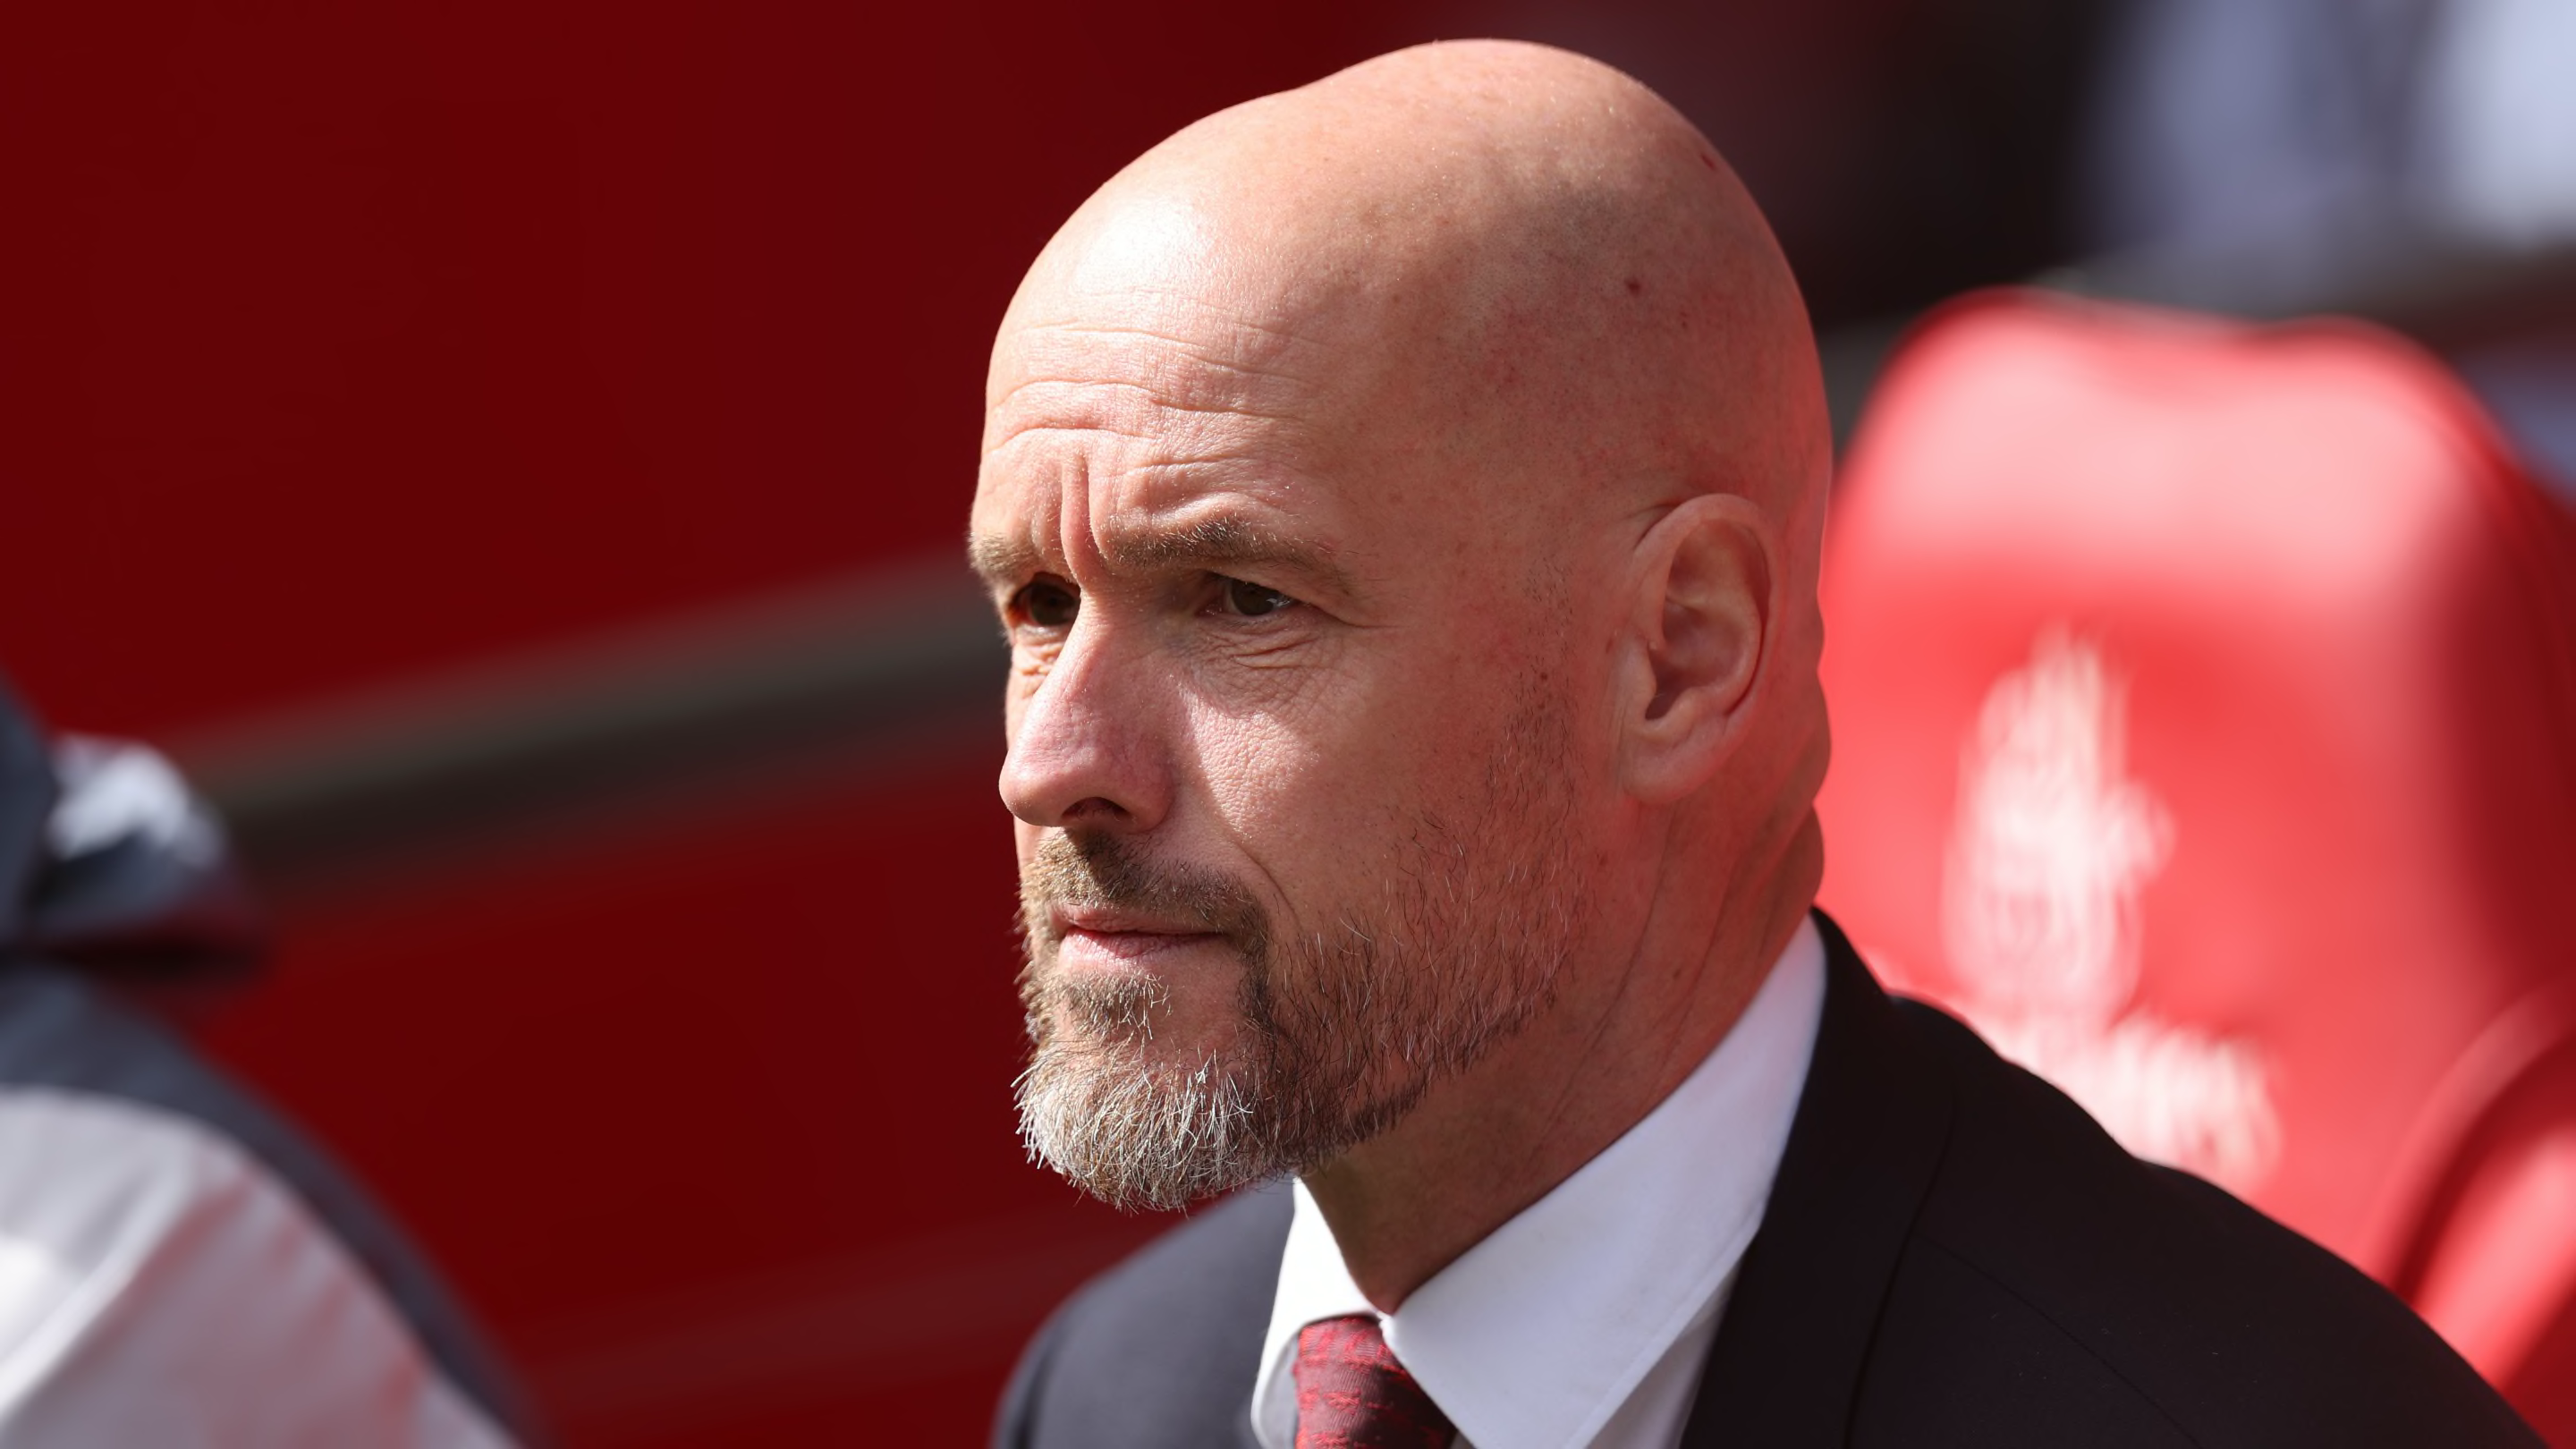 Erik ten Hag responds to claims that Man Utd are about to sack him